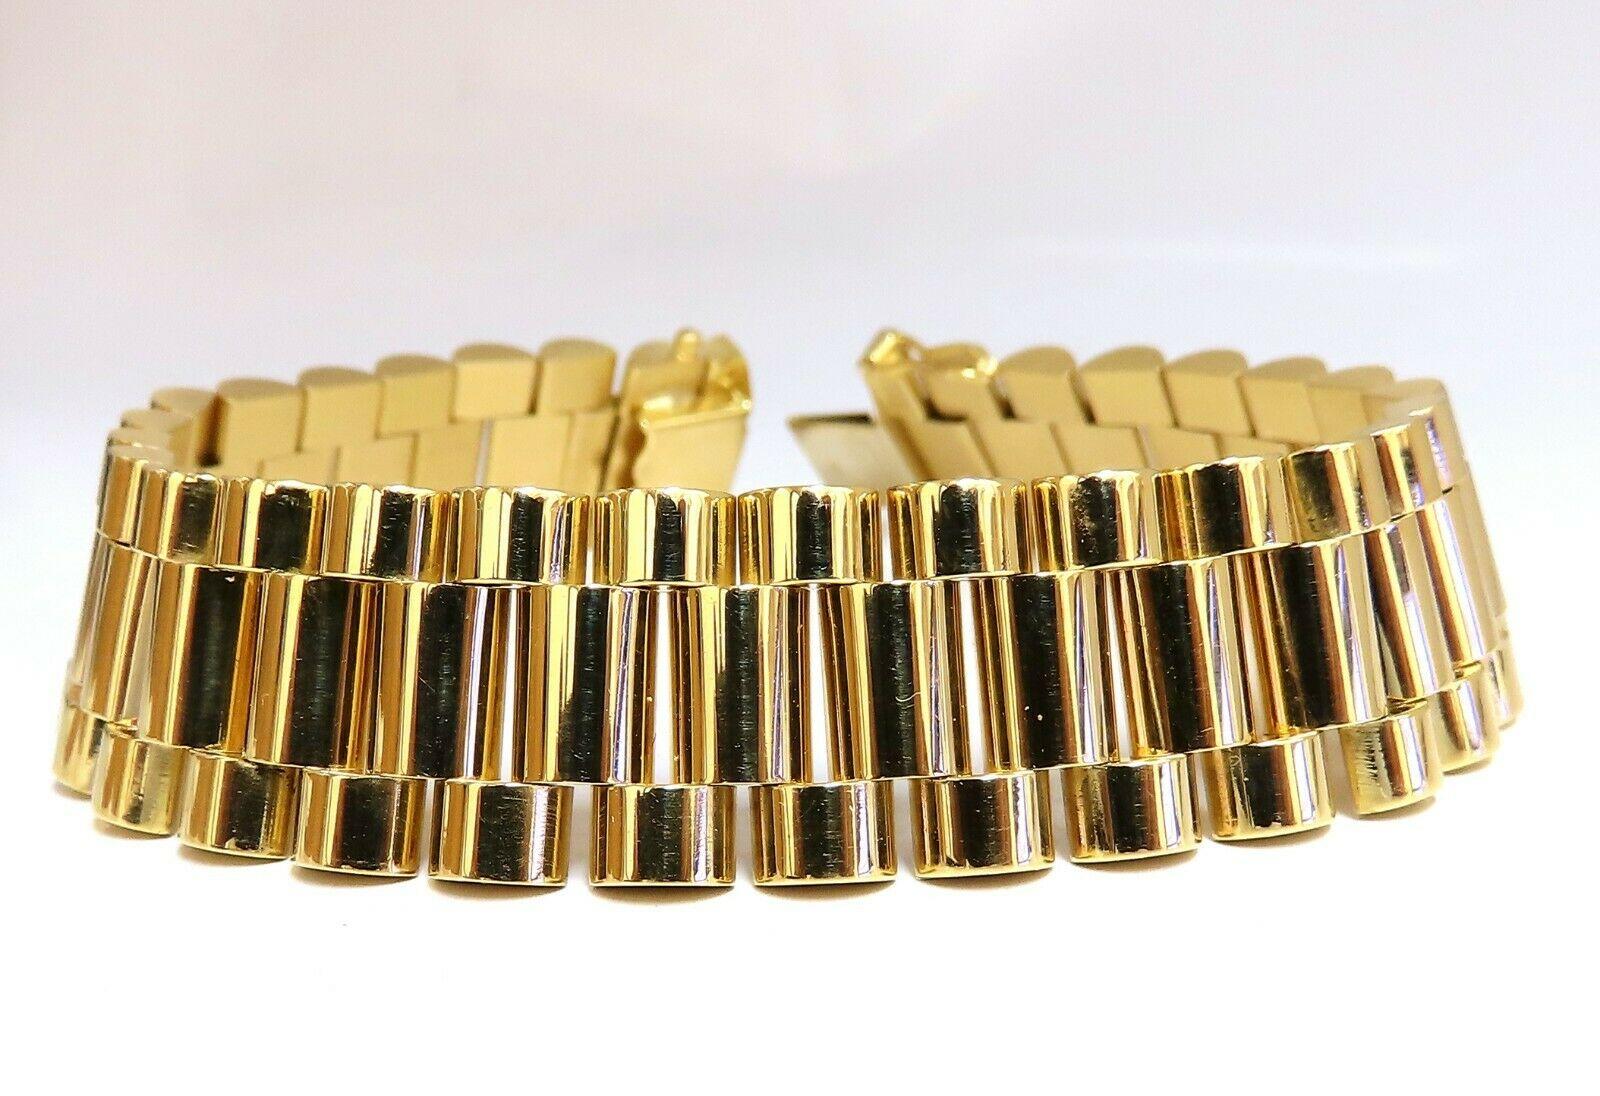 Classic Rollex Link Bracelet

Durable, Well Made

For 8 inch wrist.

18kt. yellow gold

59.7 Grams.

16.2m wide